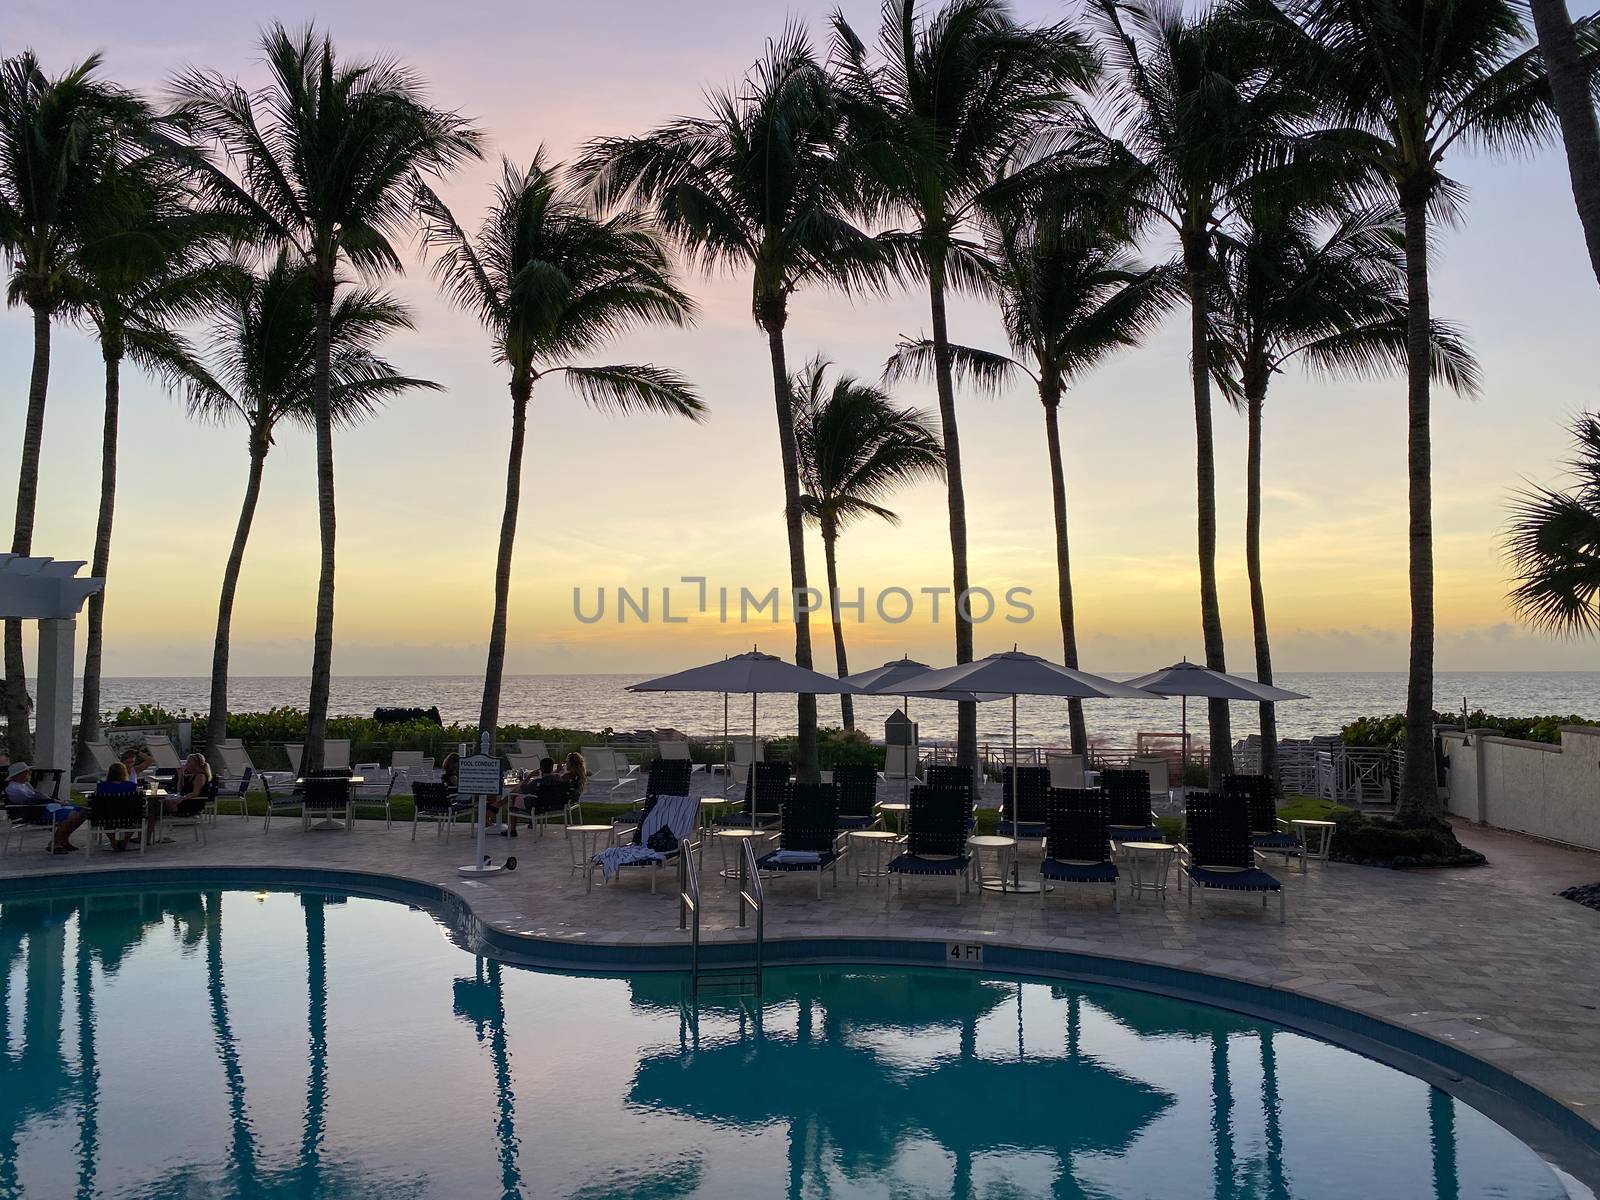 Naples, FL/USA - 10/30/20: Sunset overlooking the Gulf of Mexico with lounge chairs and palm trees at a tropical private beach club in Naples, Florida.